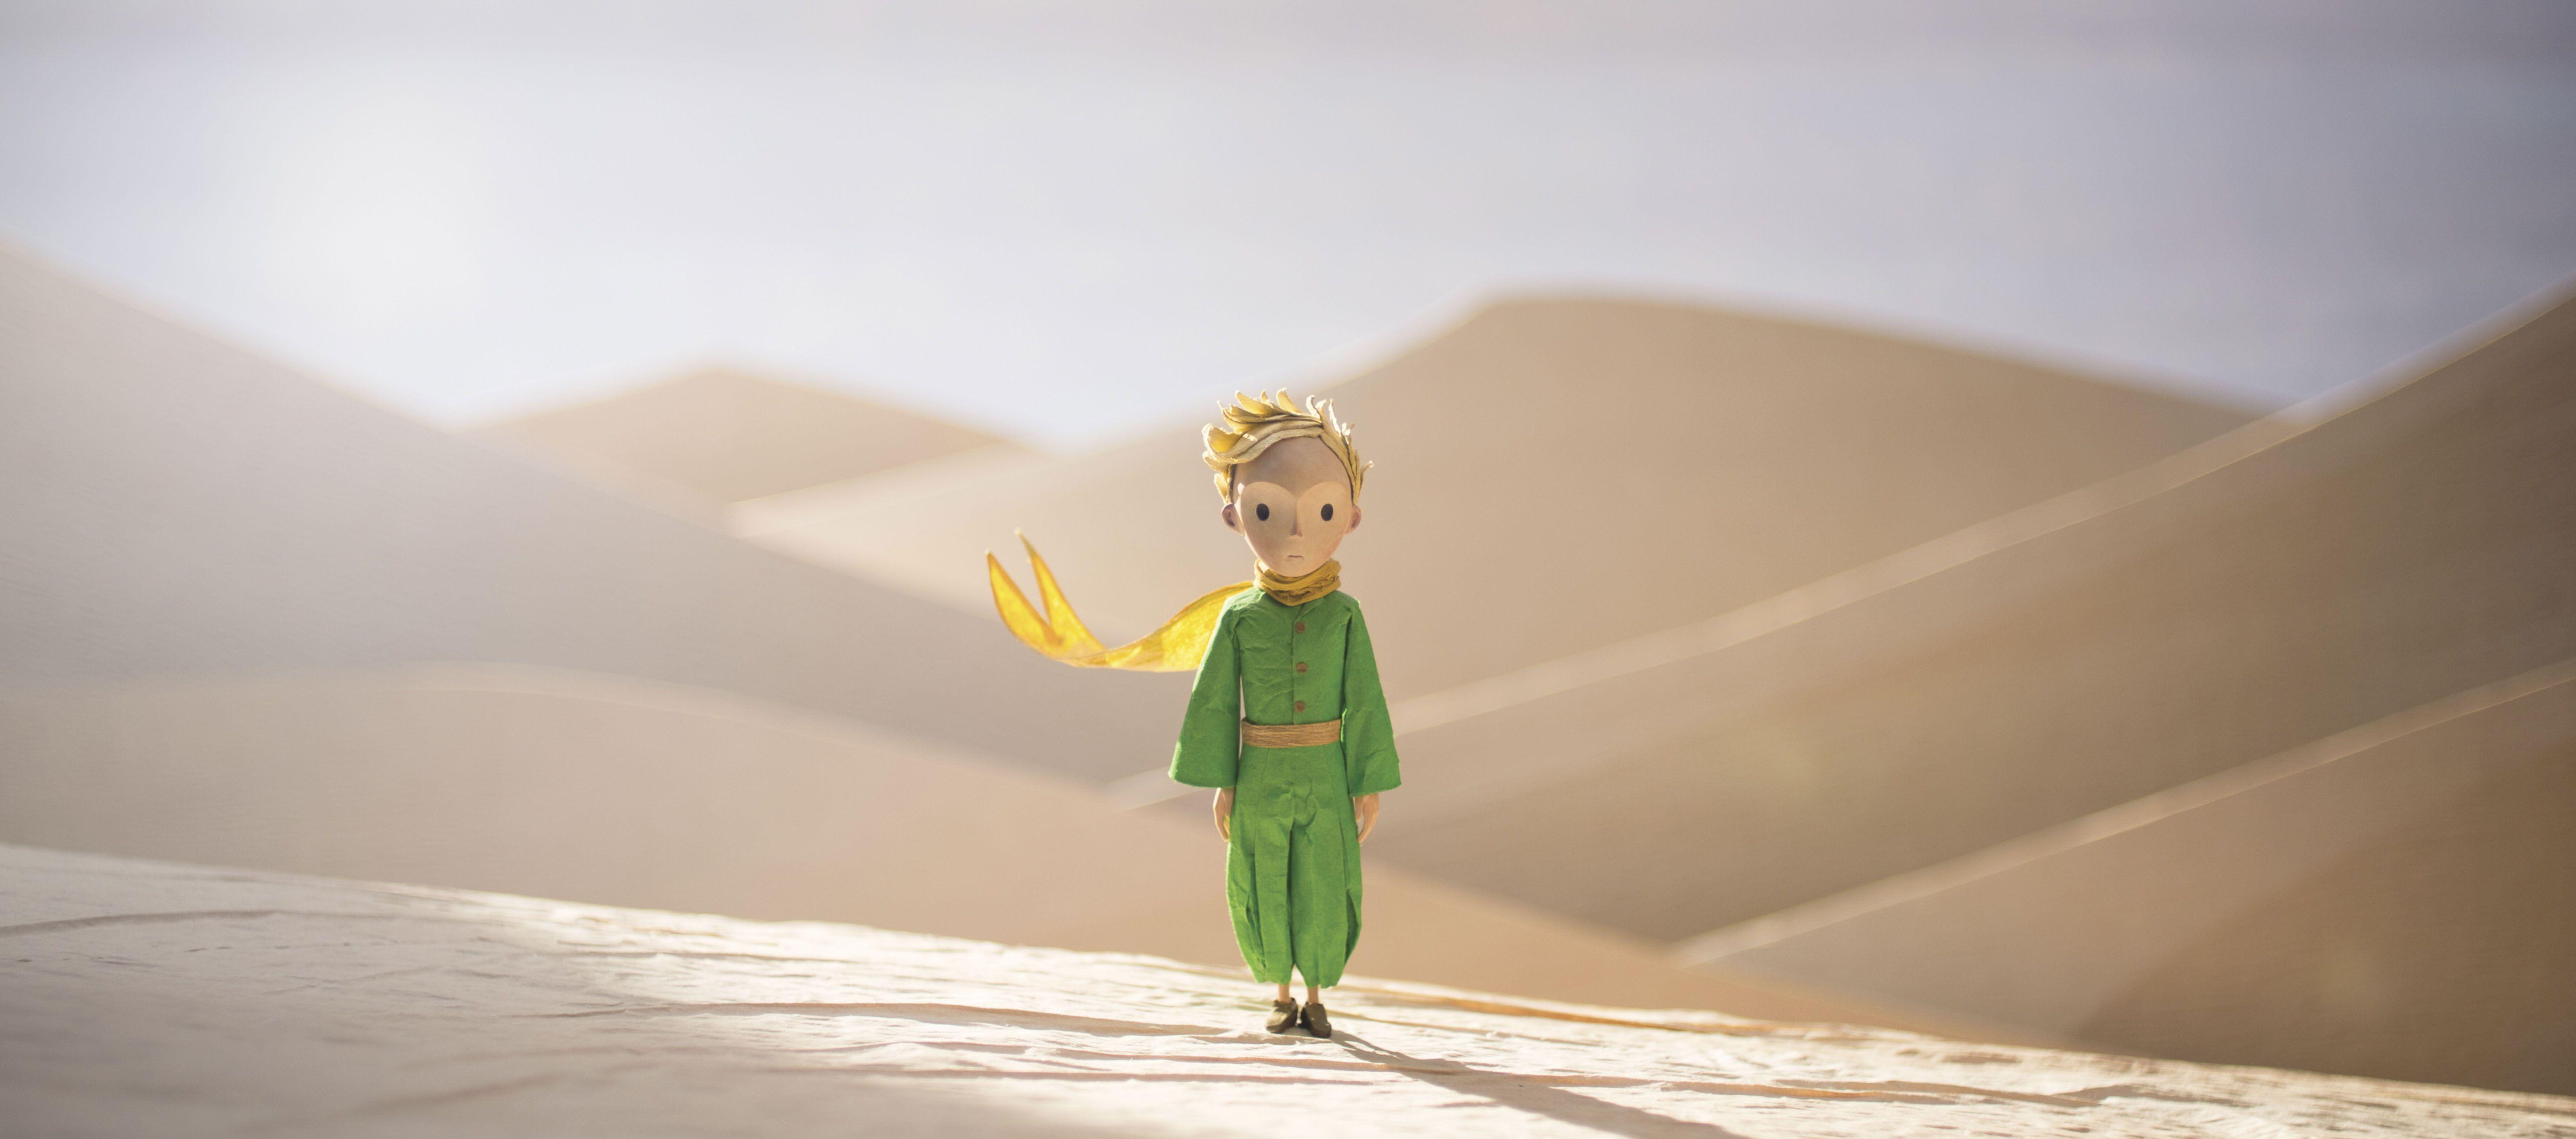 The Little Prince 2015. Movies HD 4k Wallpaper